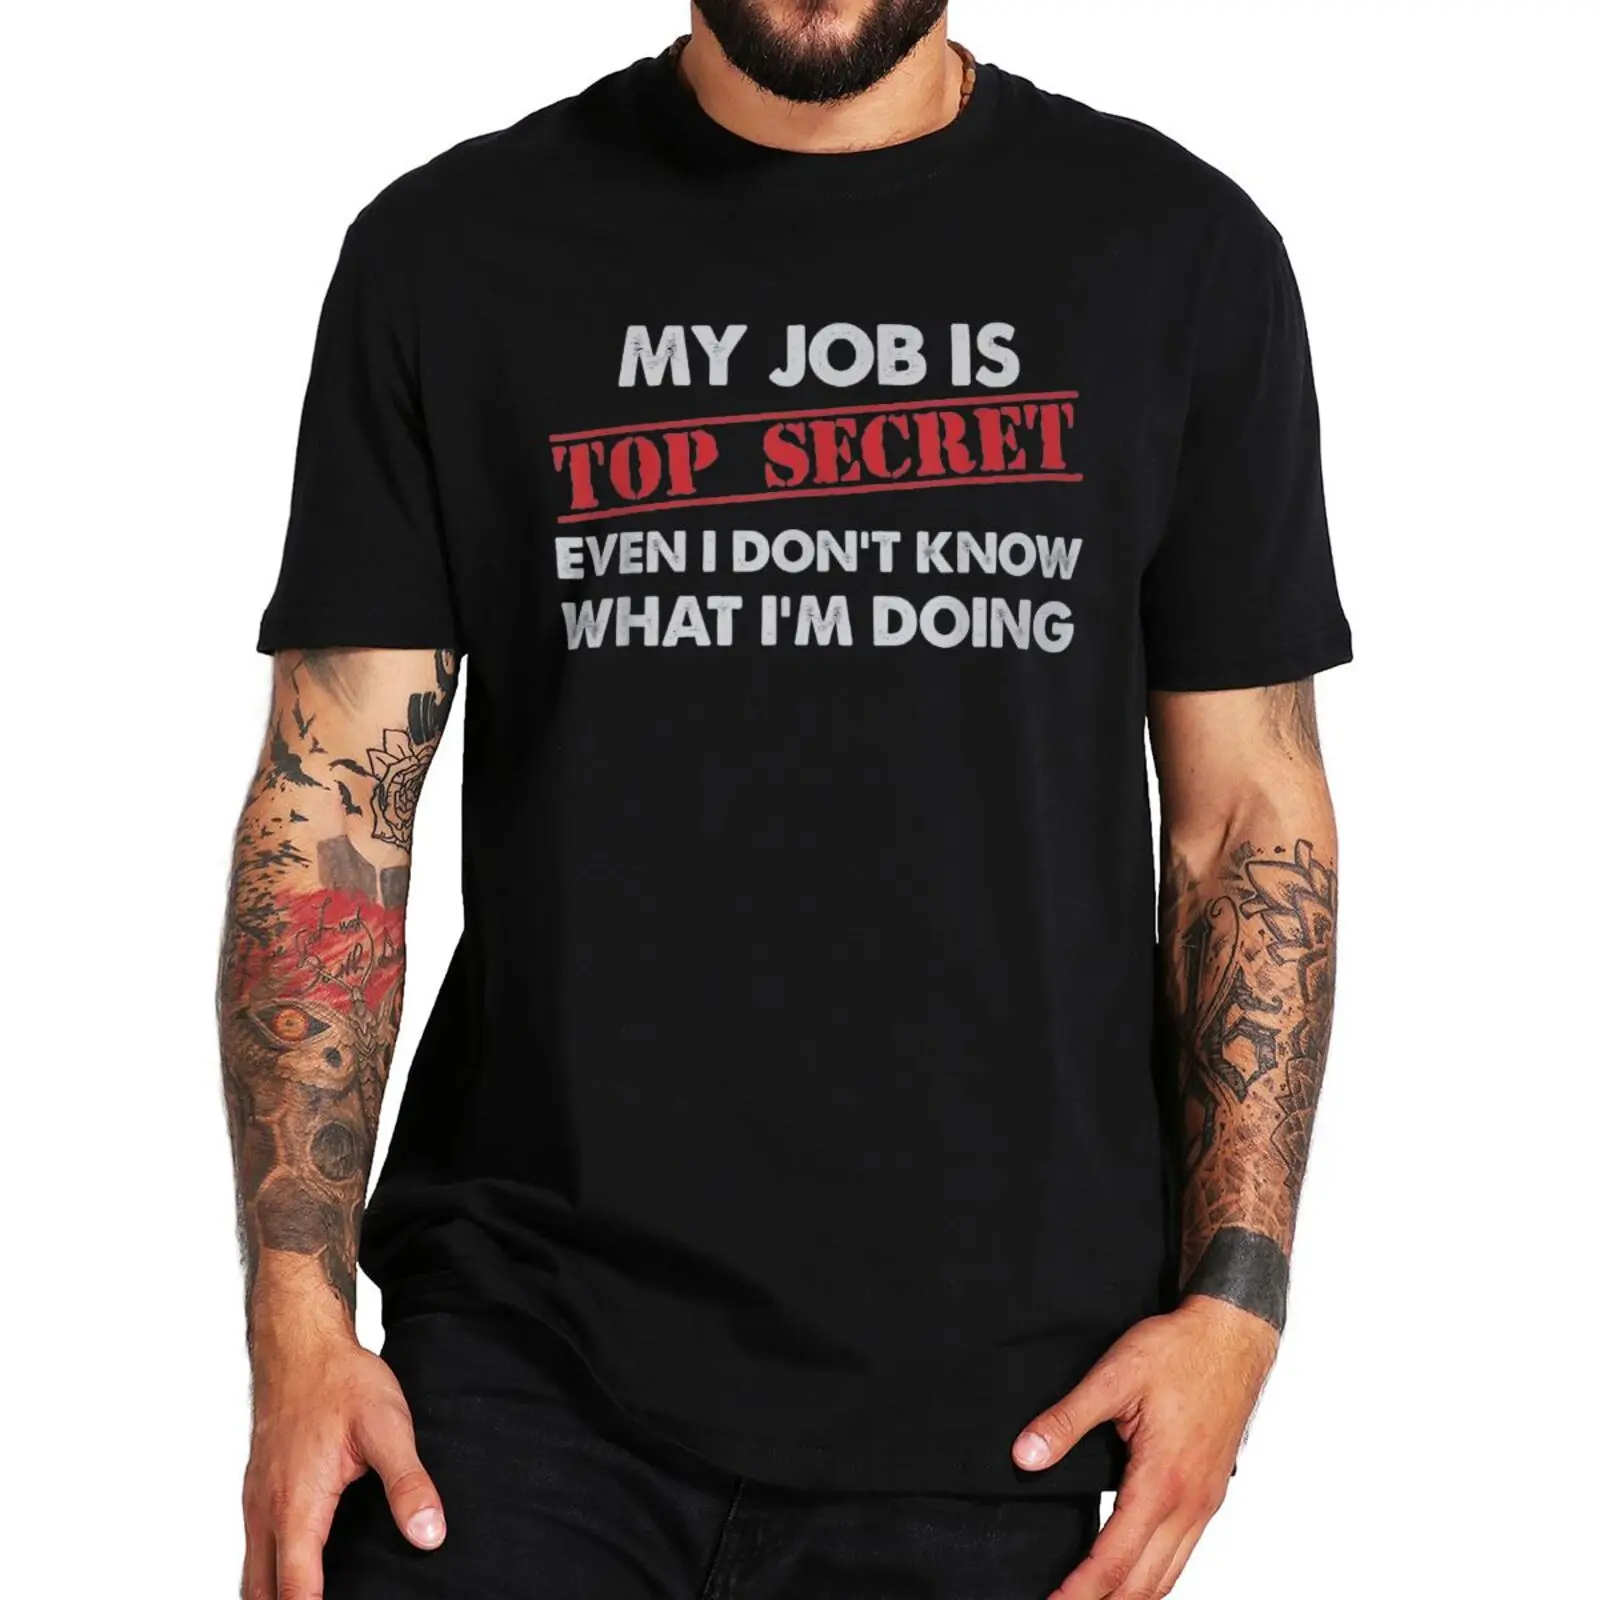 

My Job Is Top Secret Even I Don't Know What I'm Doing T Shirt Sarcastic Funny Saying Classic Tshirt 100% Cotton Short Sleeves